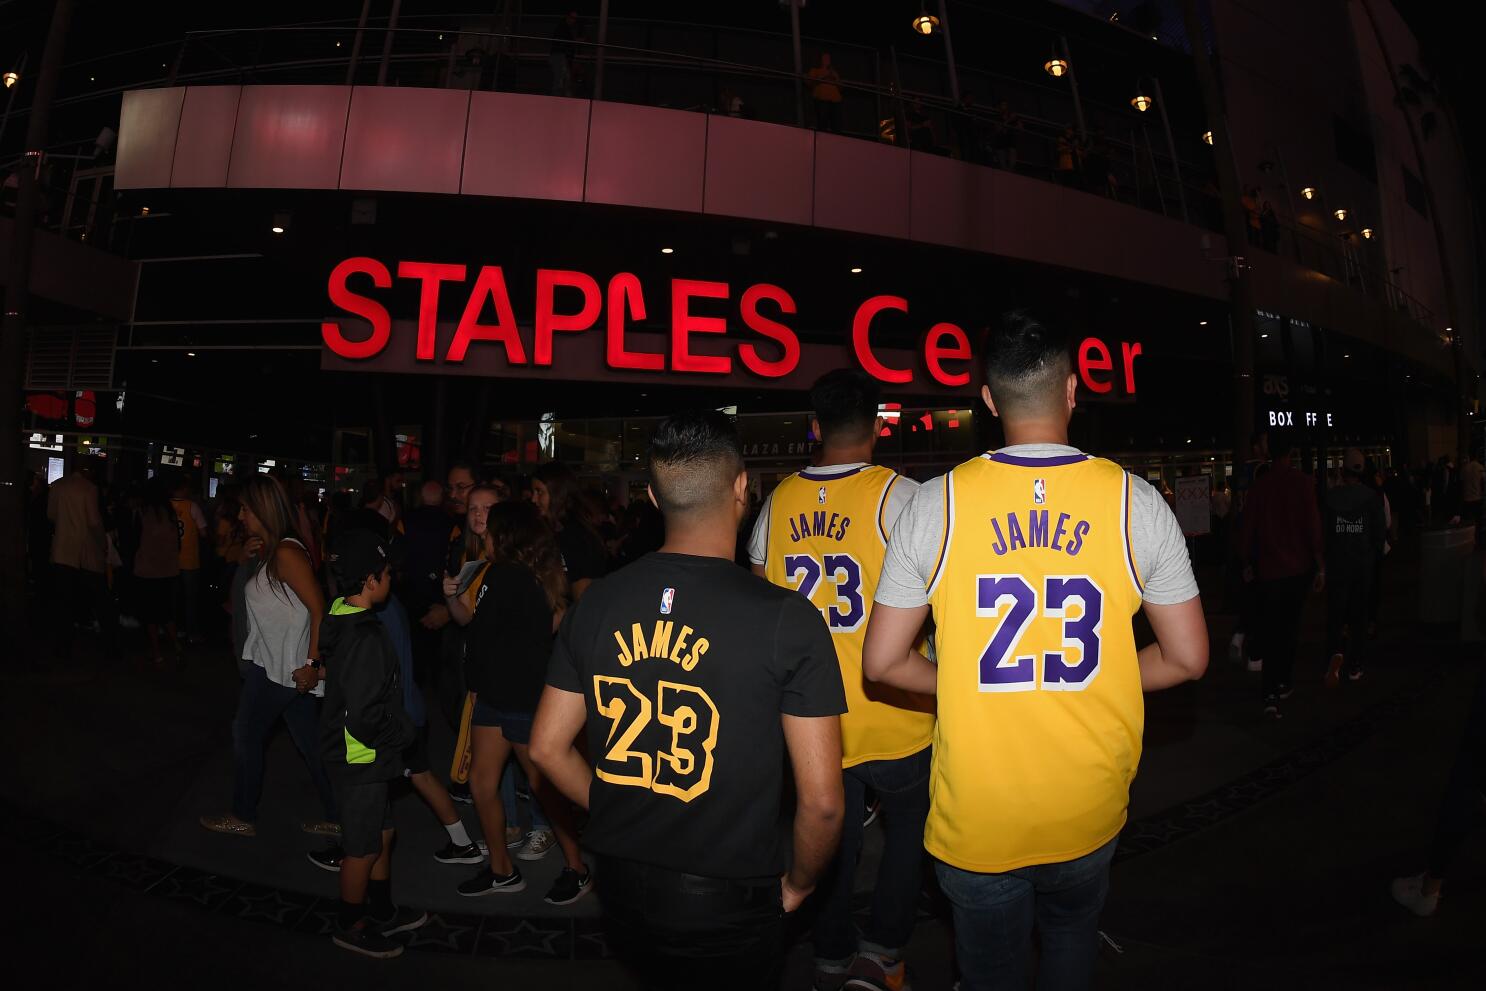 Fans rejoice upon return to Staples Center: 'For me, the Lakers